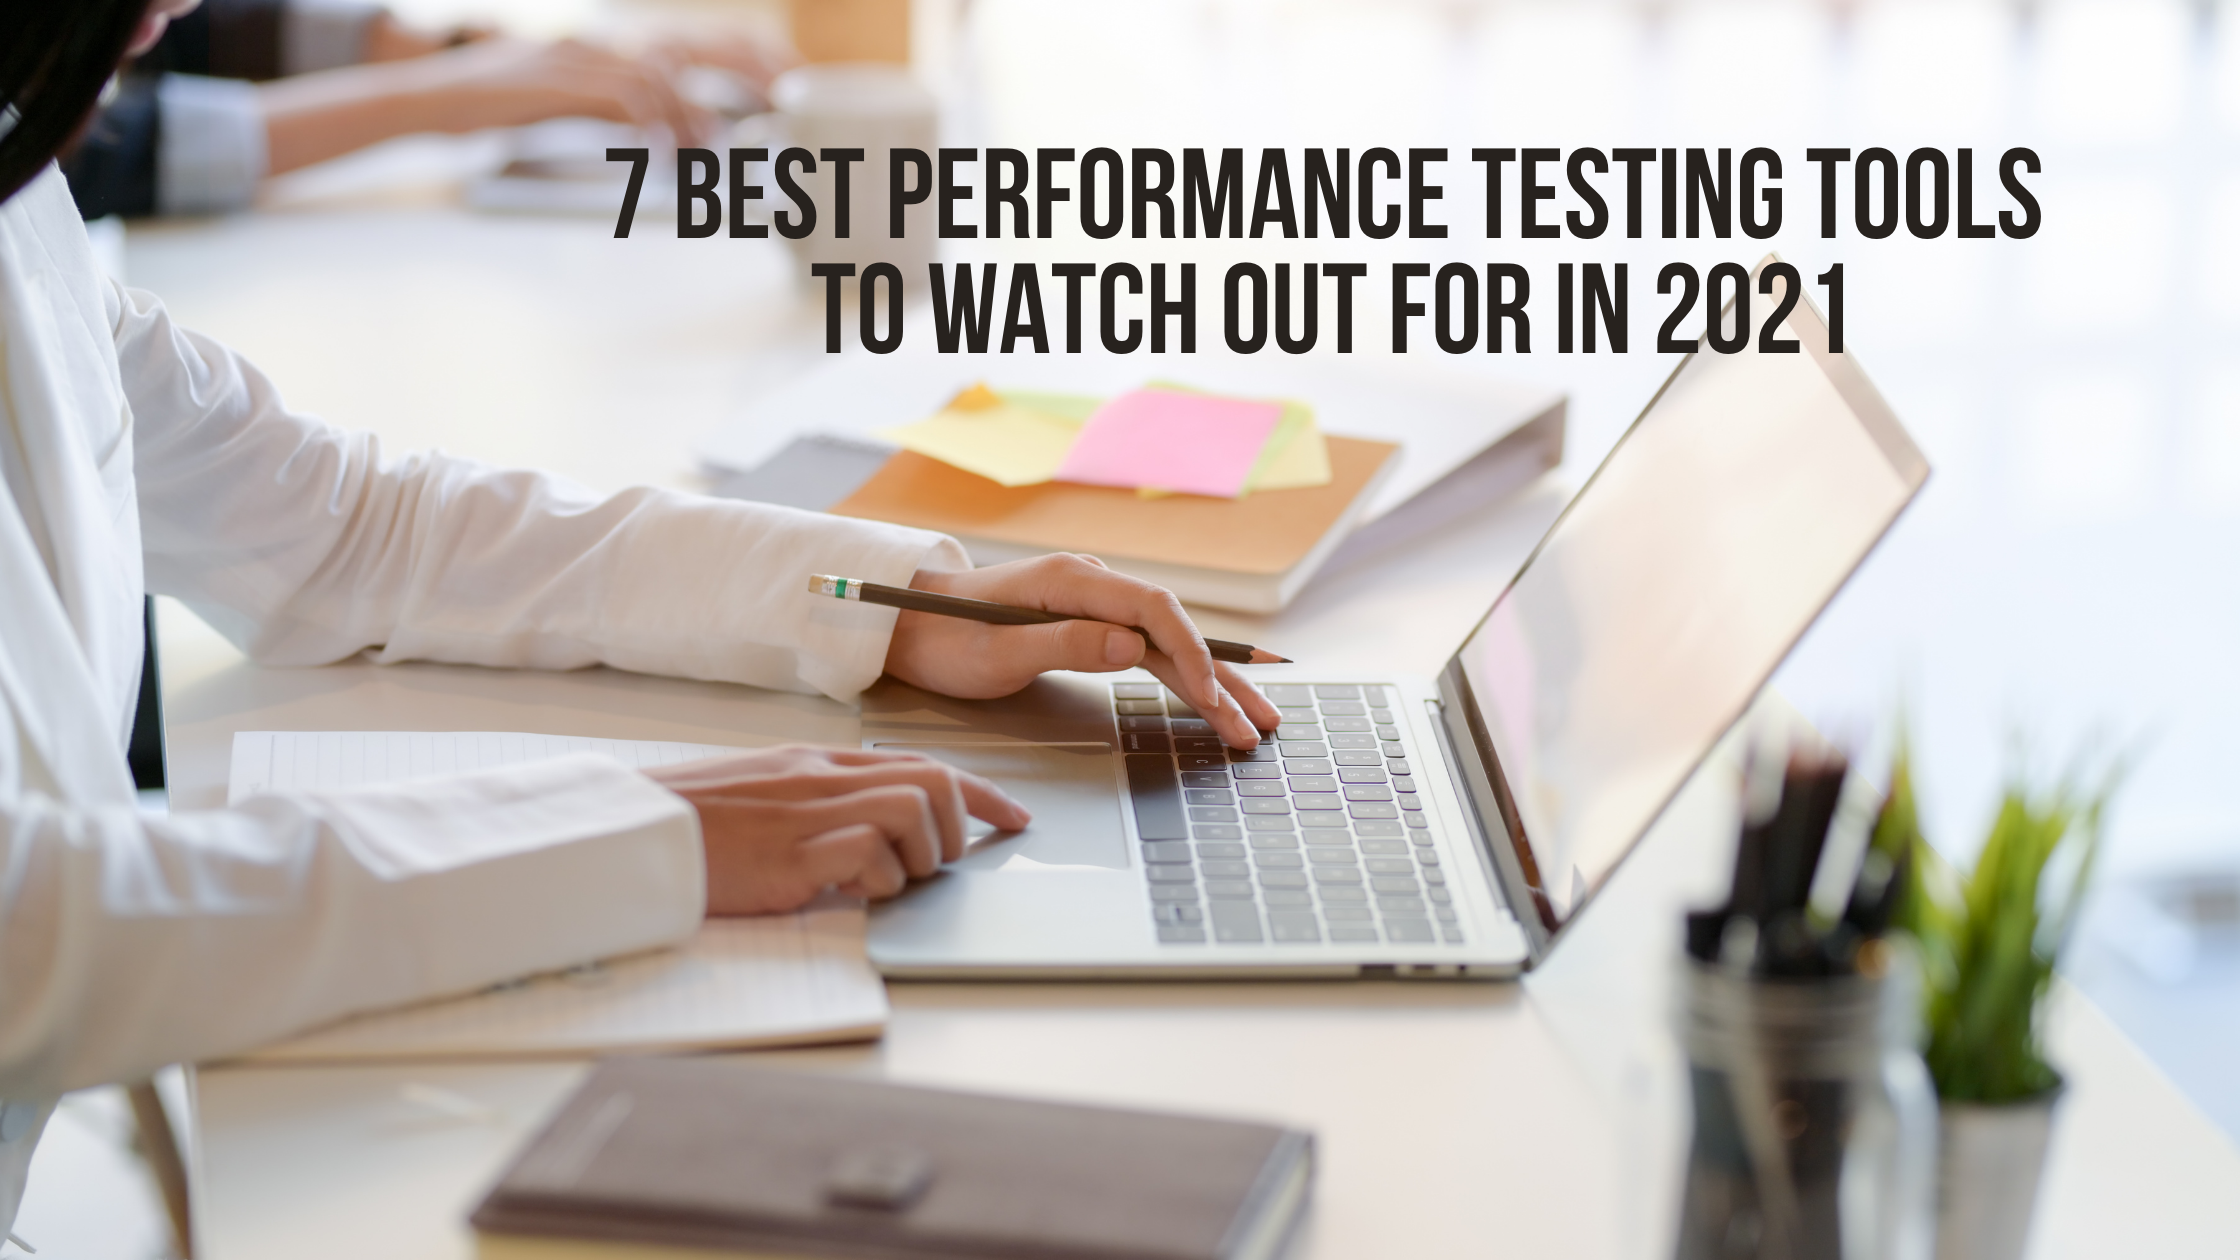 7 Best Performance Testing Tools to Look out for in 2021.